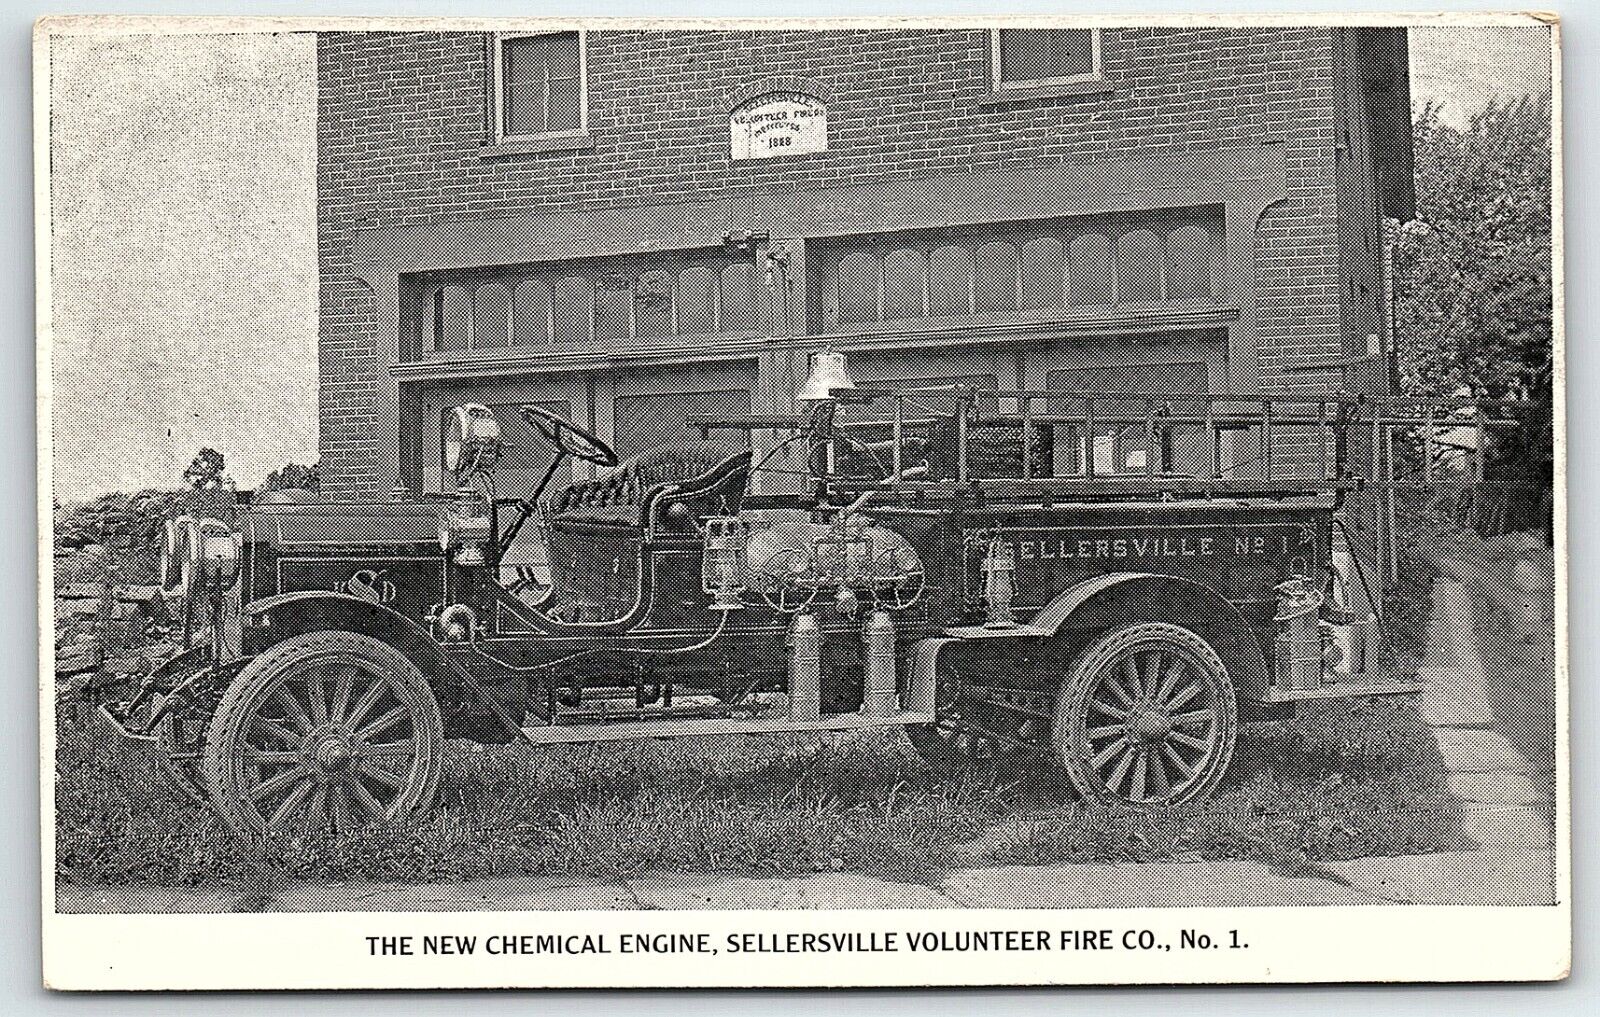 c1910 SELLERSVILLE PA VOLUNTEER FIRE CO NO 1 NEW CHEMICAL ENGINE POSTCARD P3917